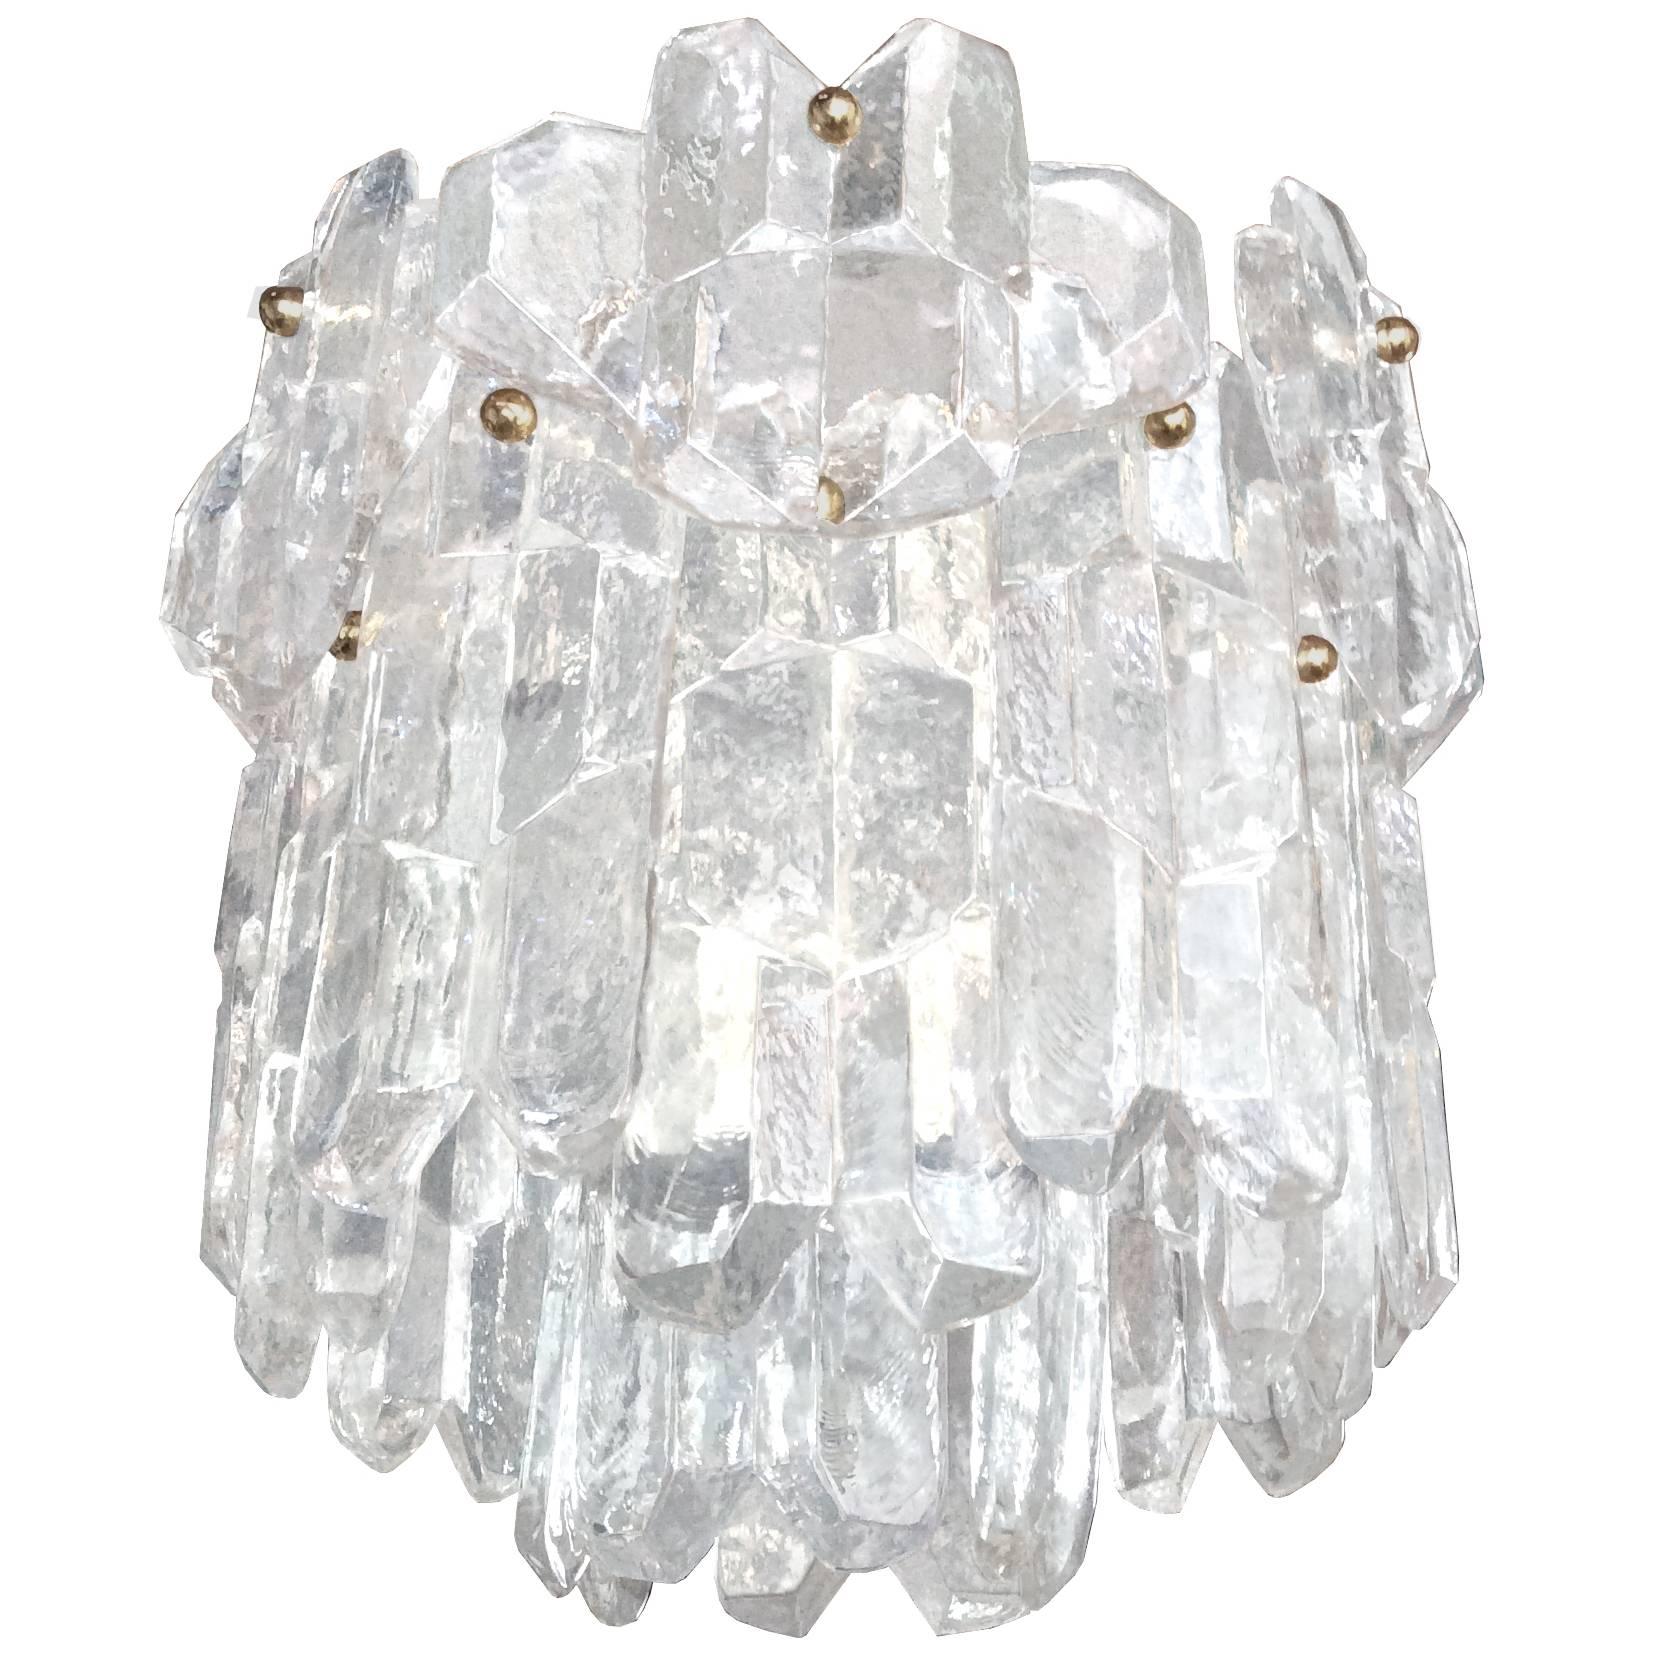 J. T. Kalmar Thick Textured Clear Glass Chandelier For Sale